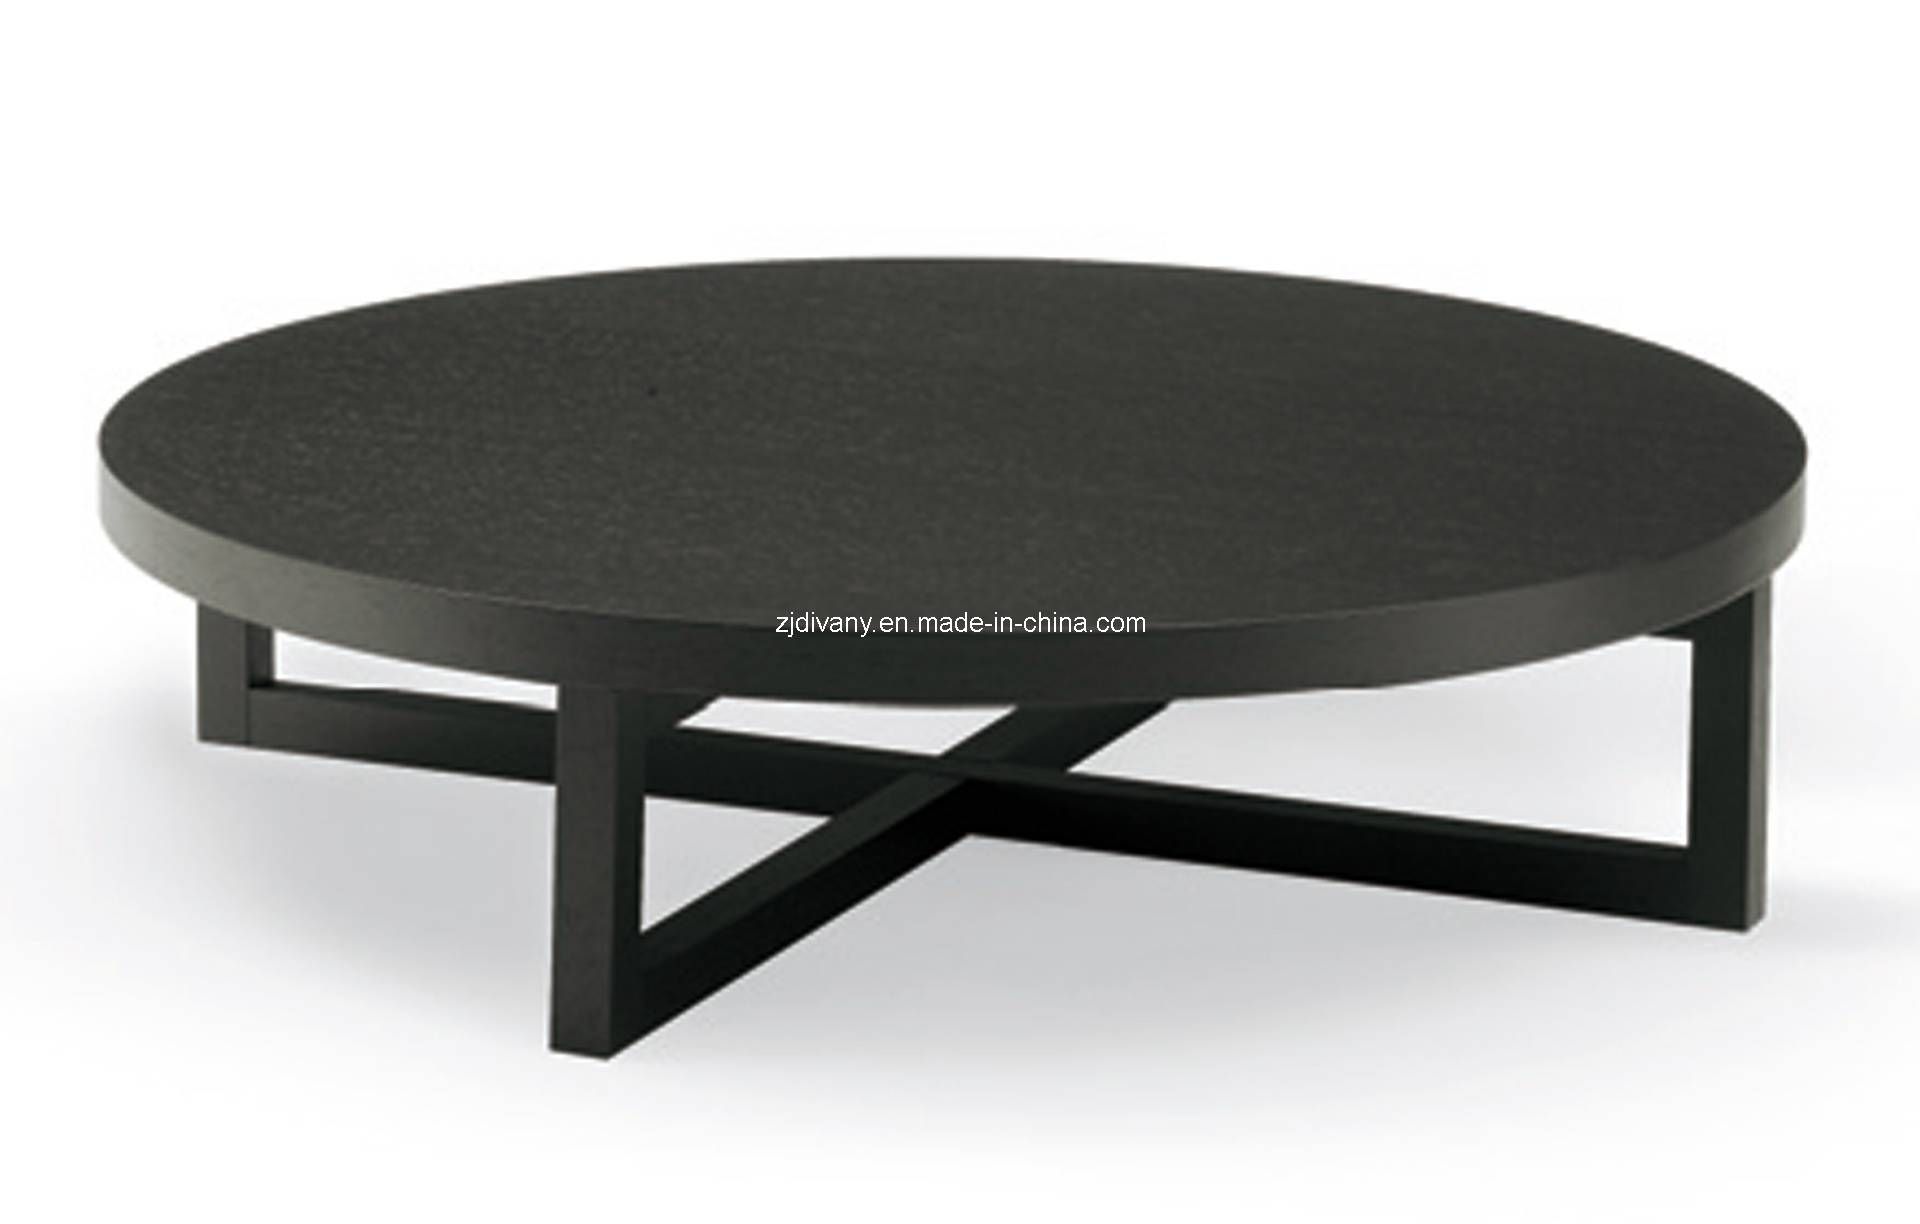 Coffee Table: Exciting Modern Round Coffee Table Design Ideas Regarding Contemporary Round Coffee Tables (View 3 of 15)